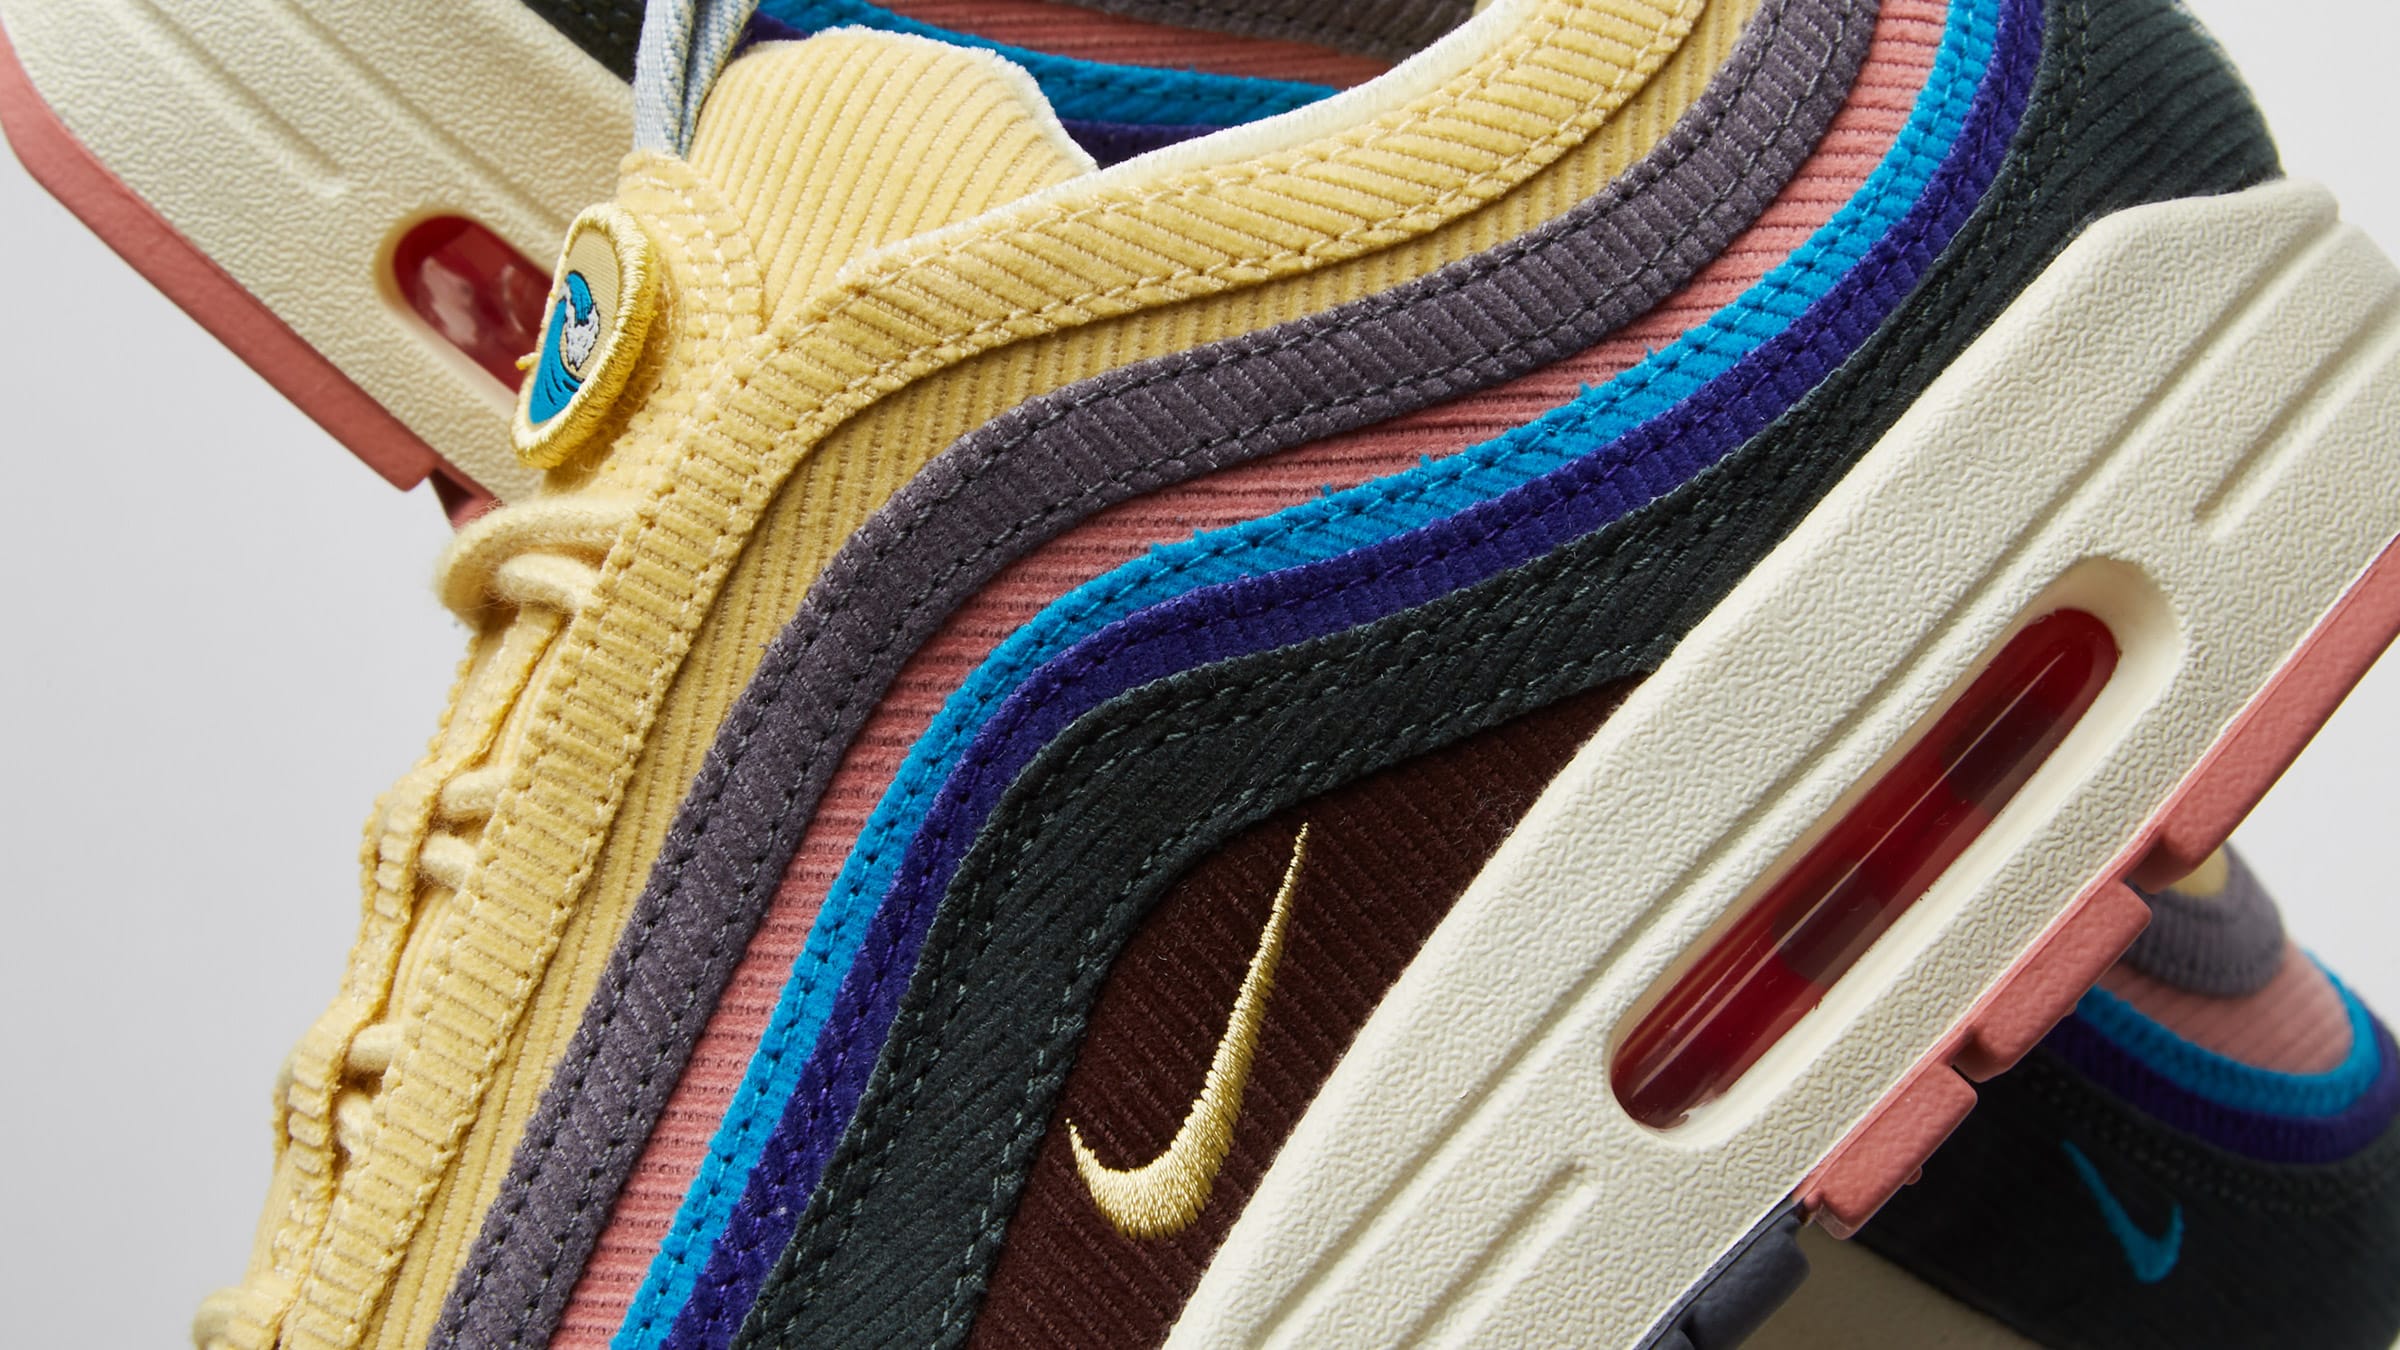 sean wotherspoon 97 219